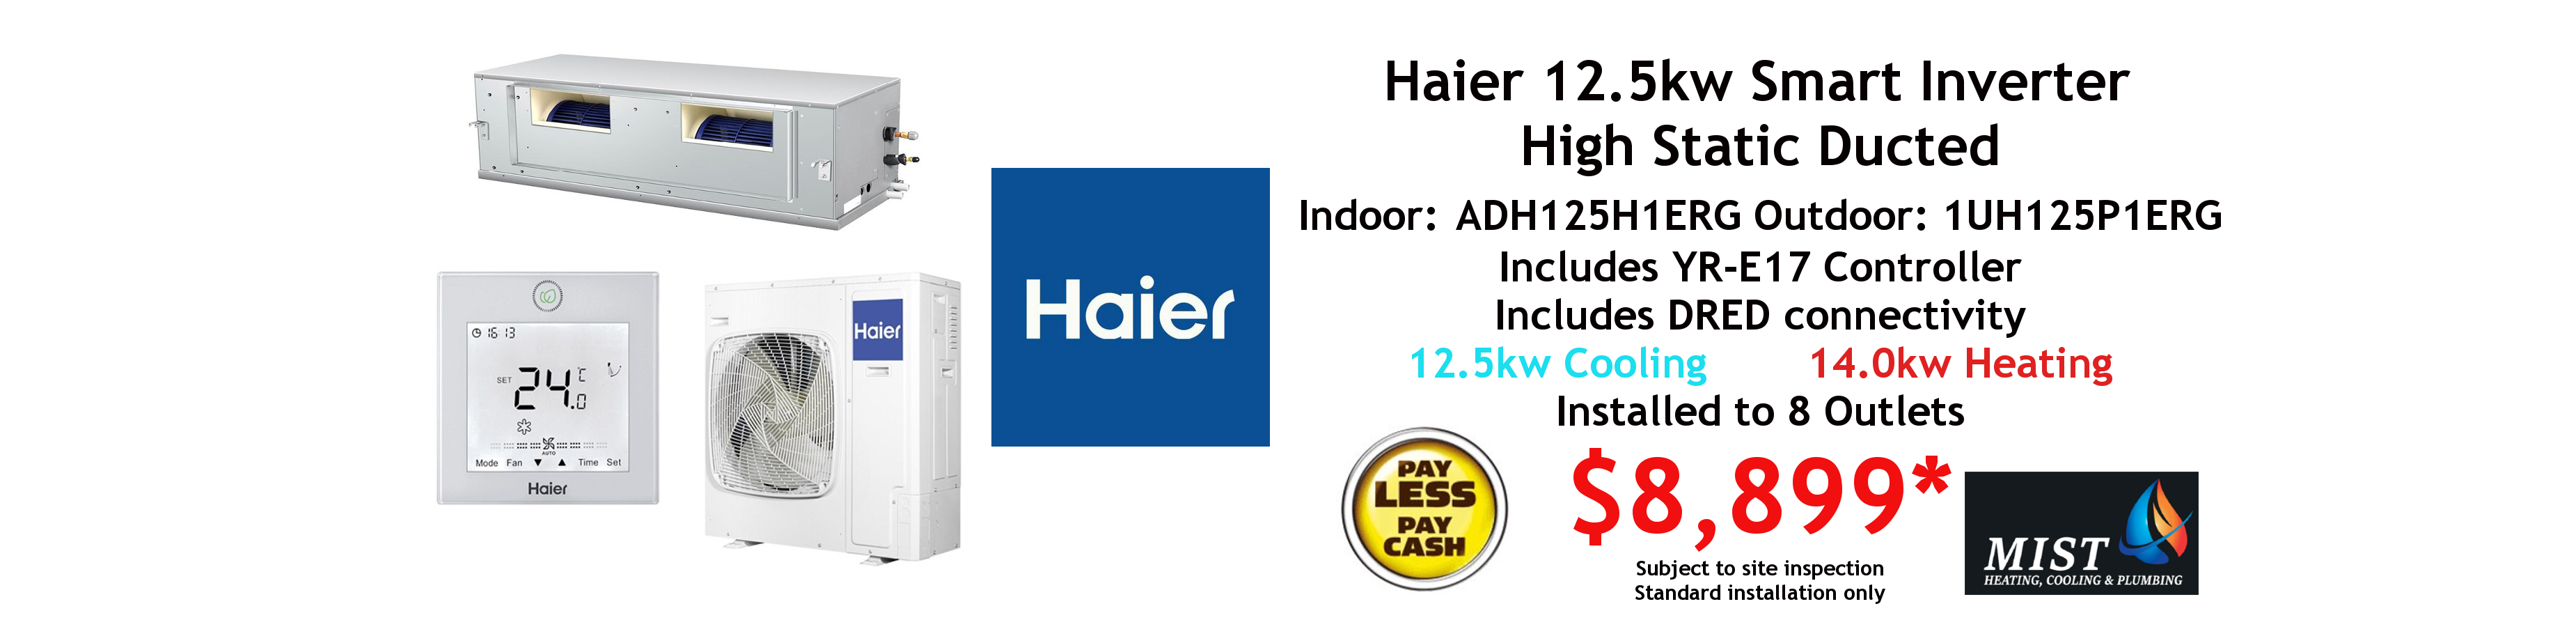 haier ducted 12.5kw